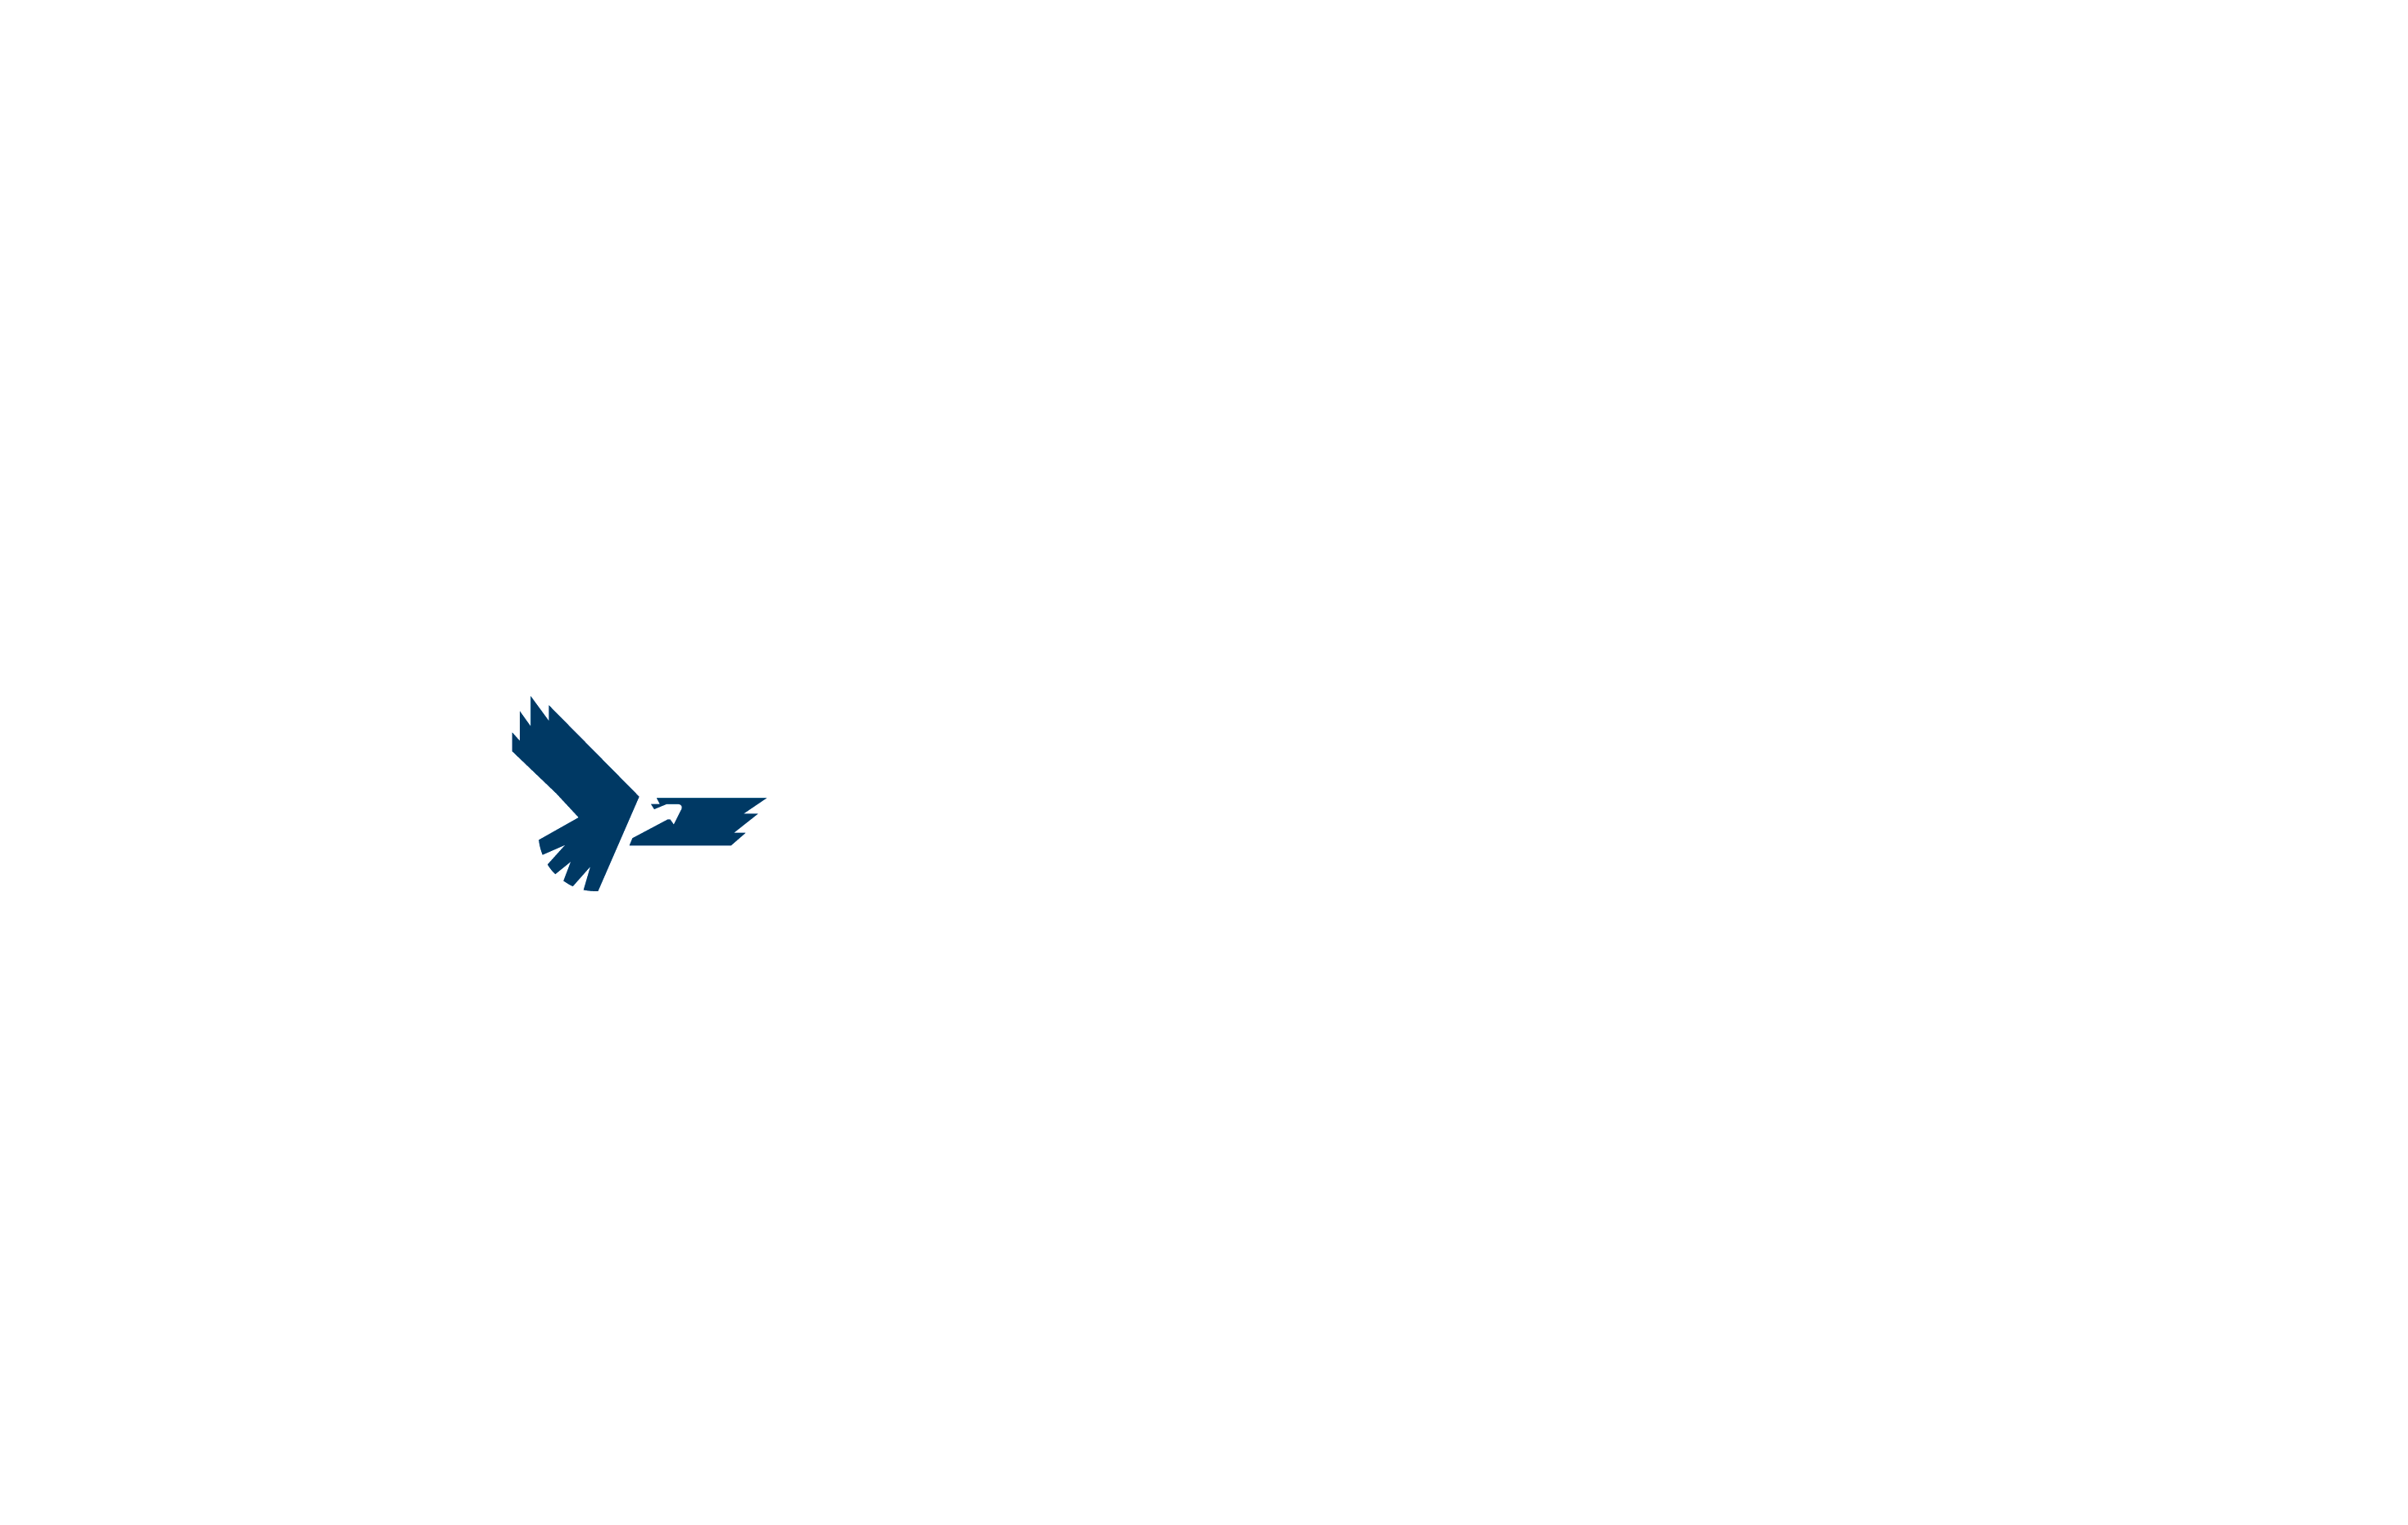 Our Social Impact